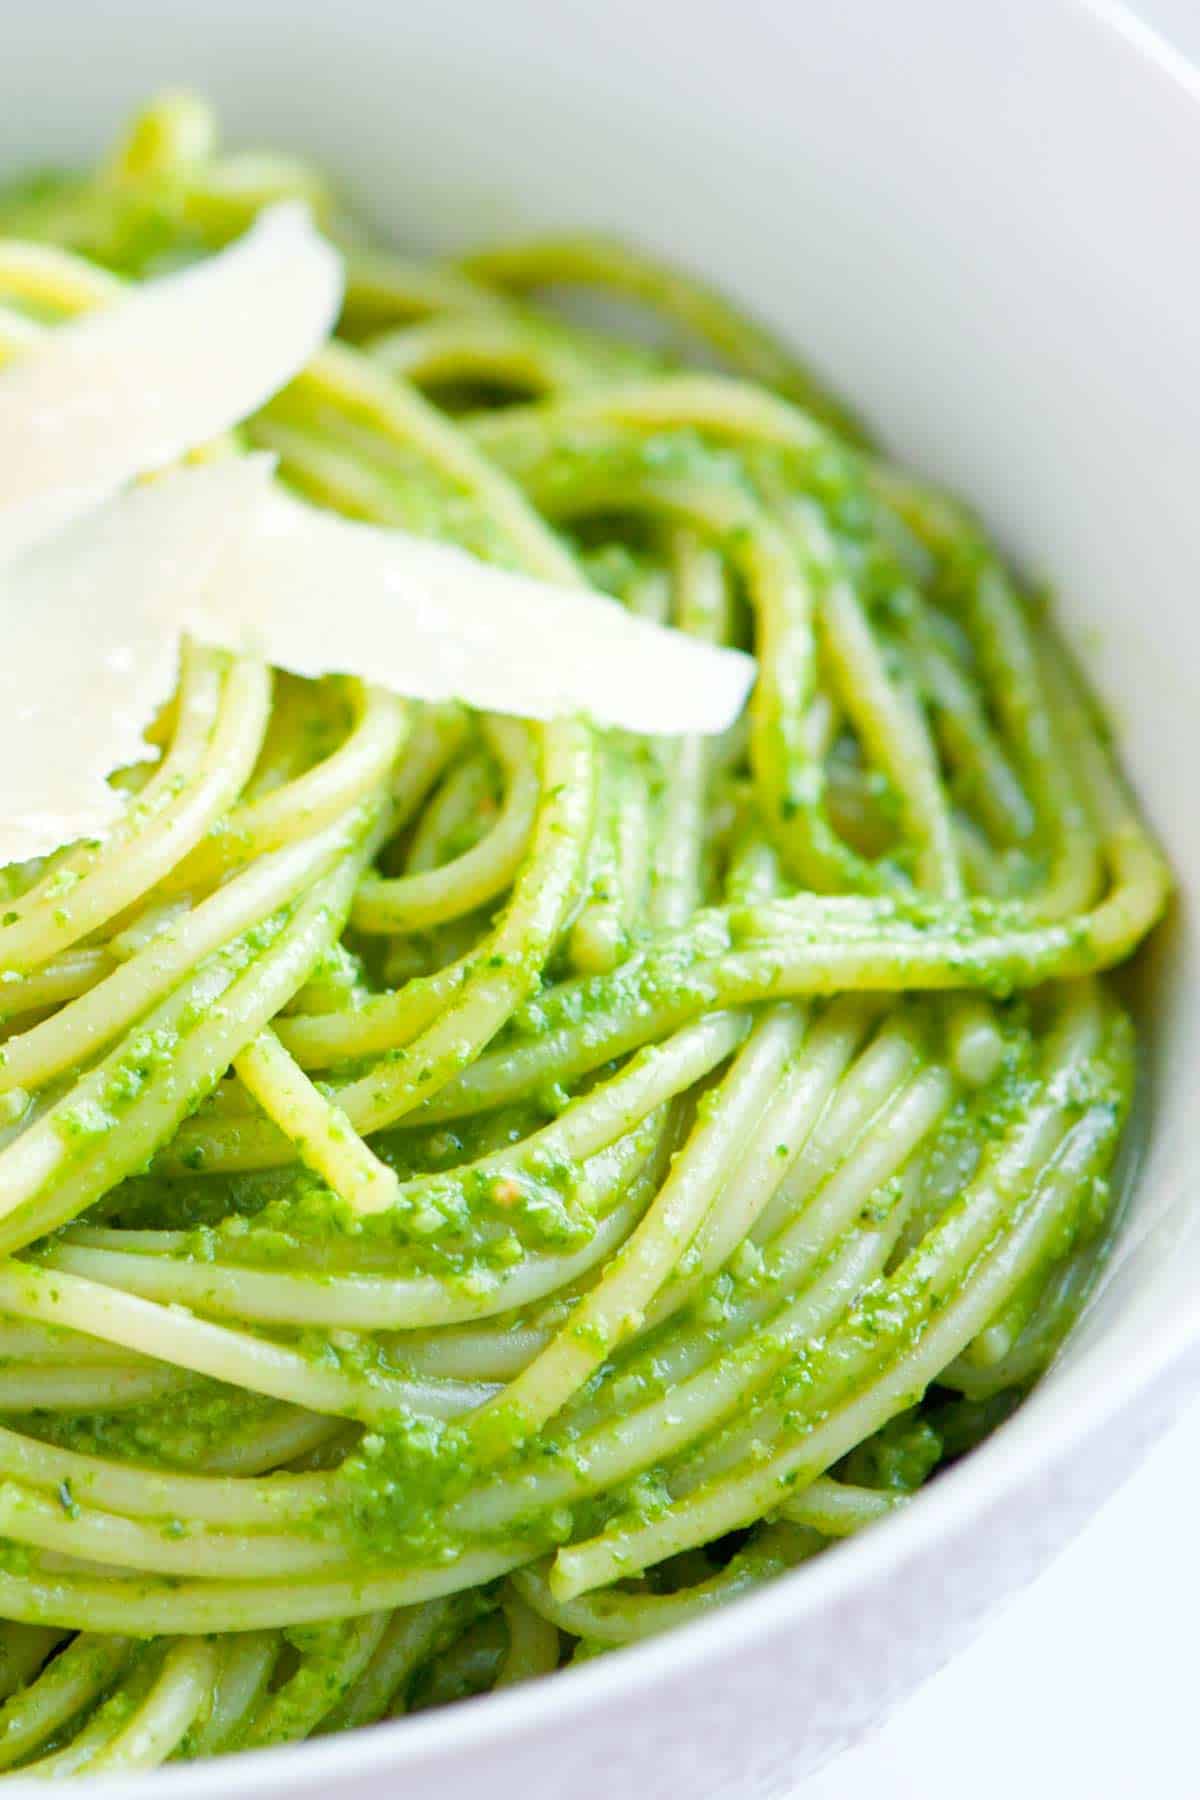 How to Make Pesto with Kale and Almonds